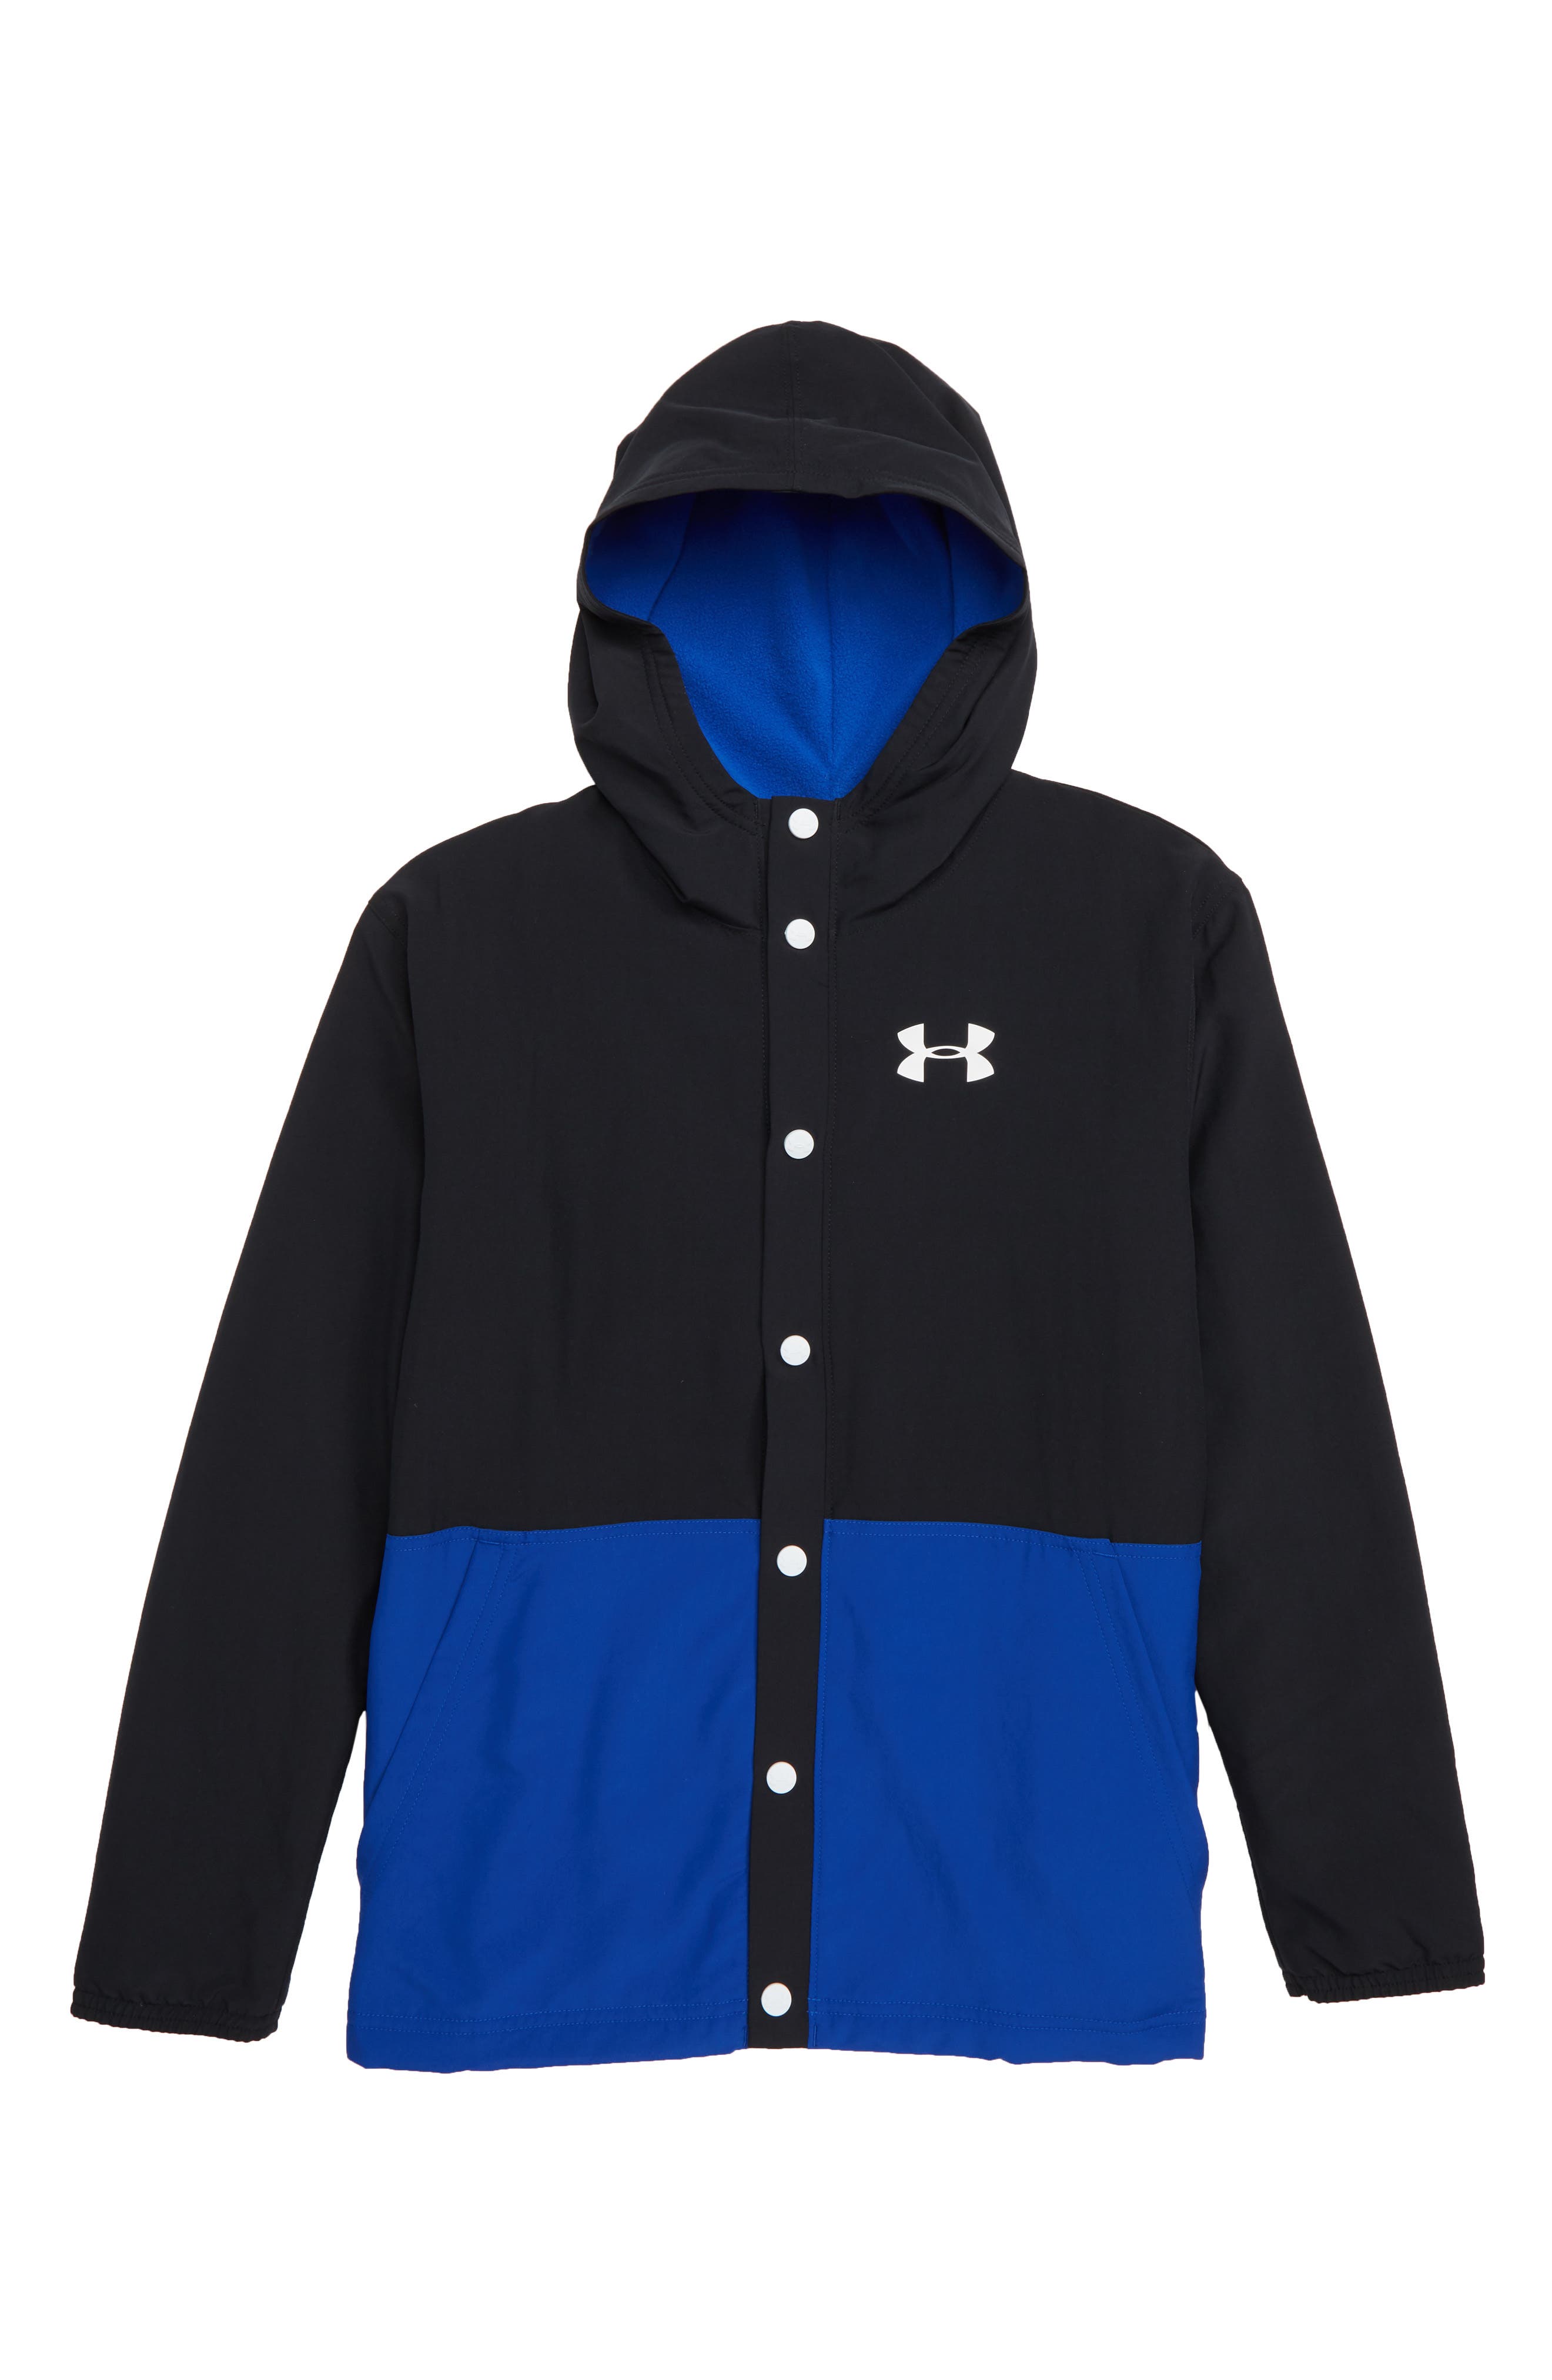 under armour coaches pullover